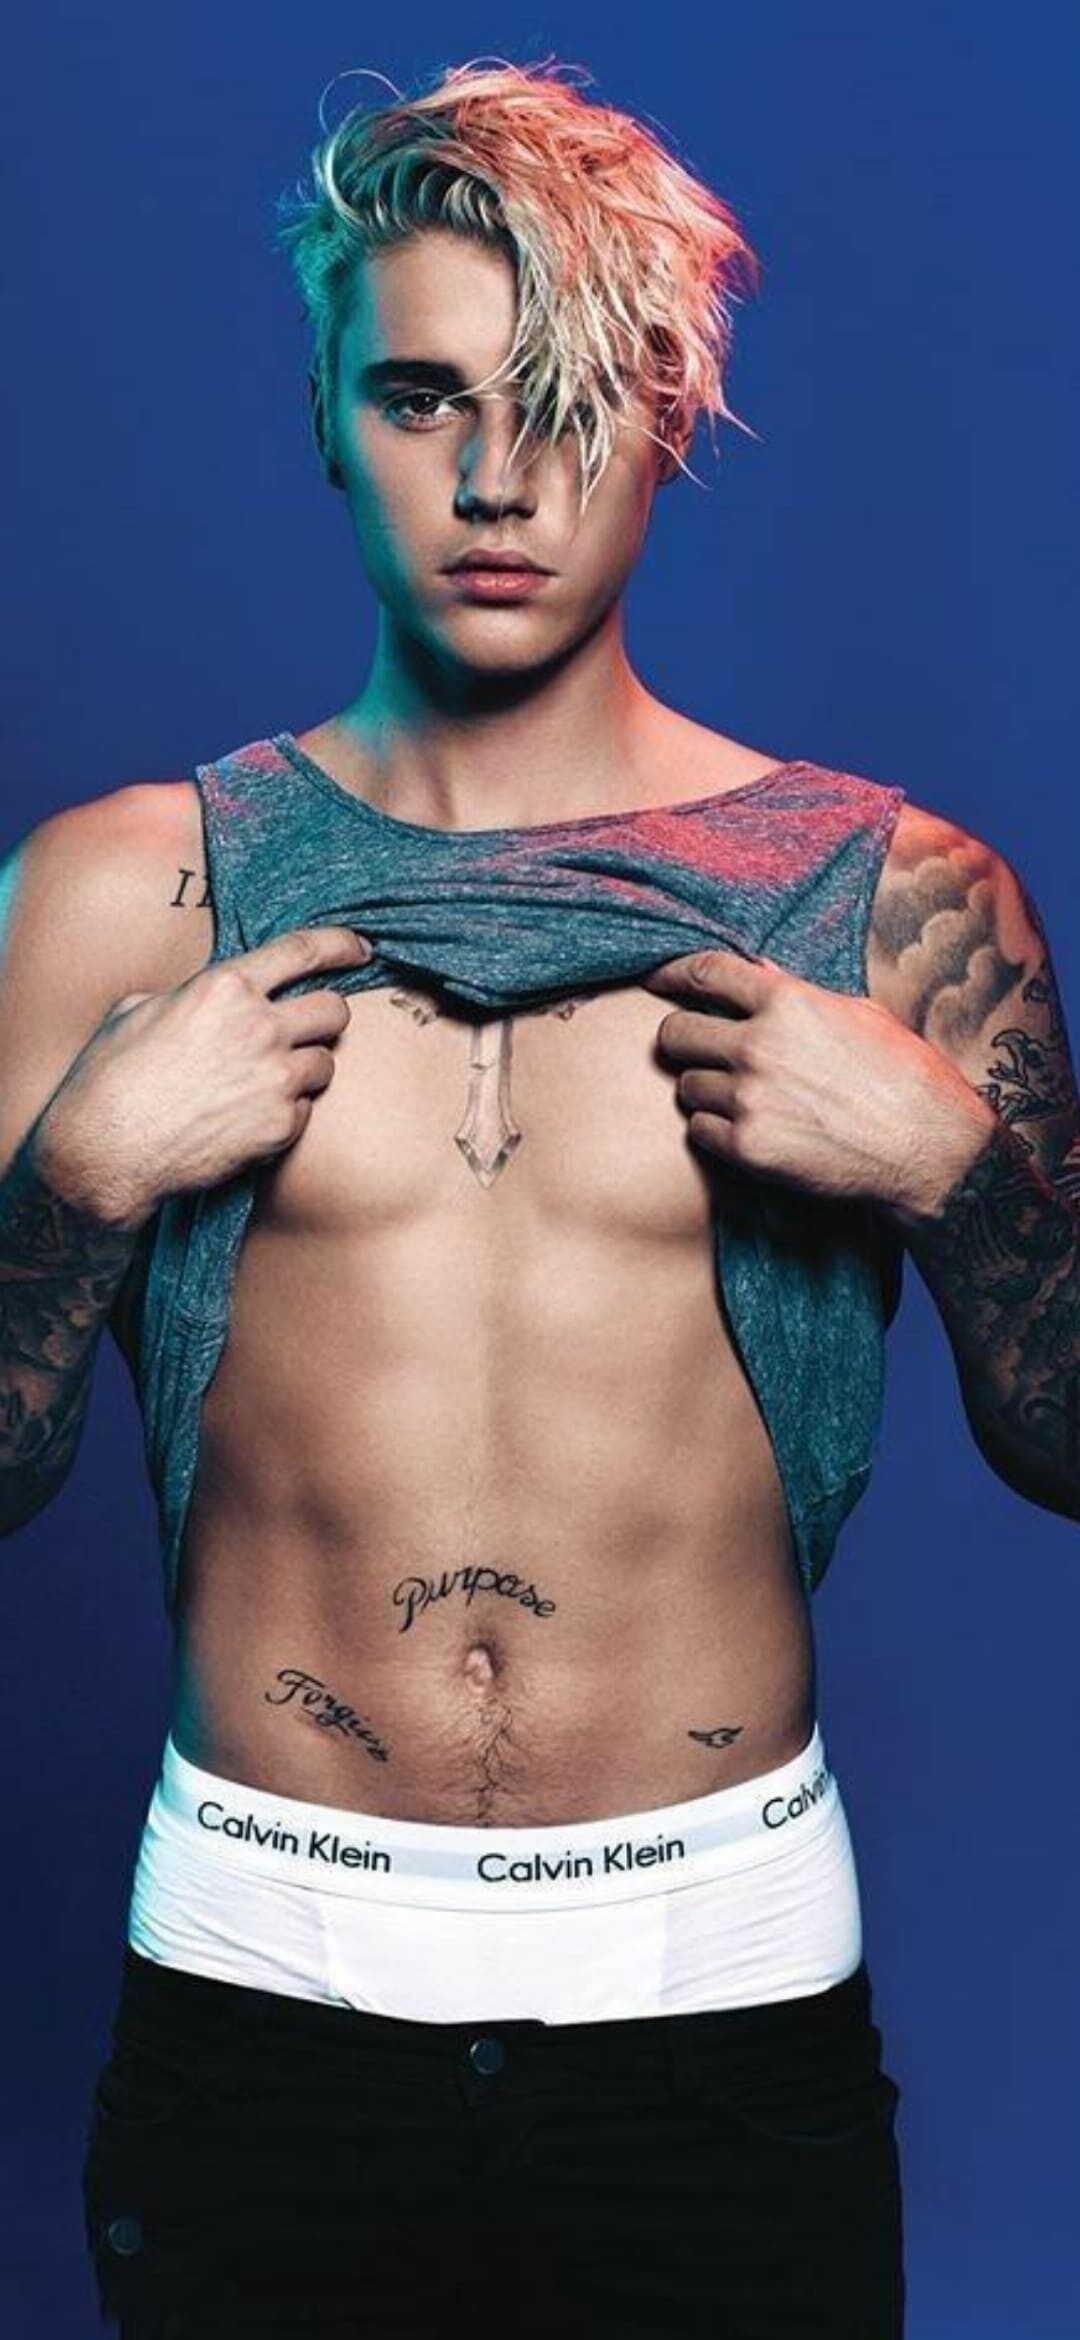 Justin Bieber: Pop star, One of the world's best-selling music artists. 1080x2340 HD Background.